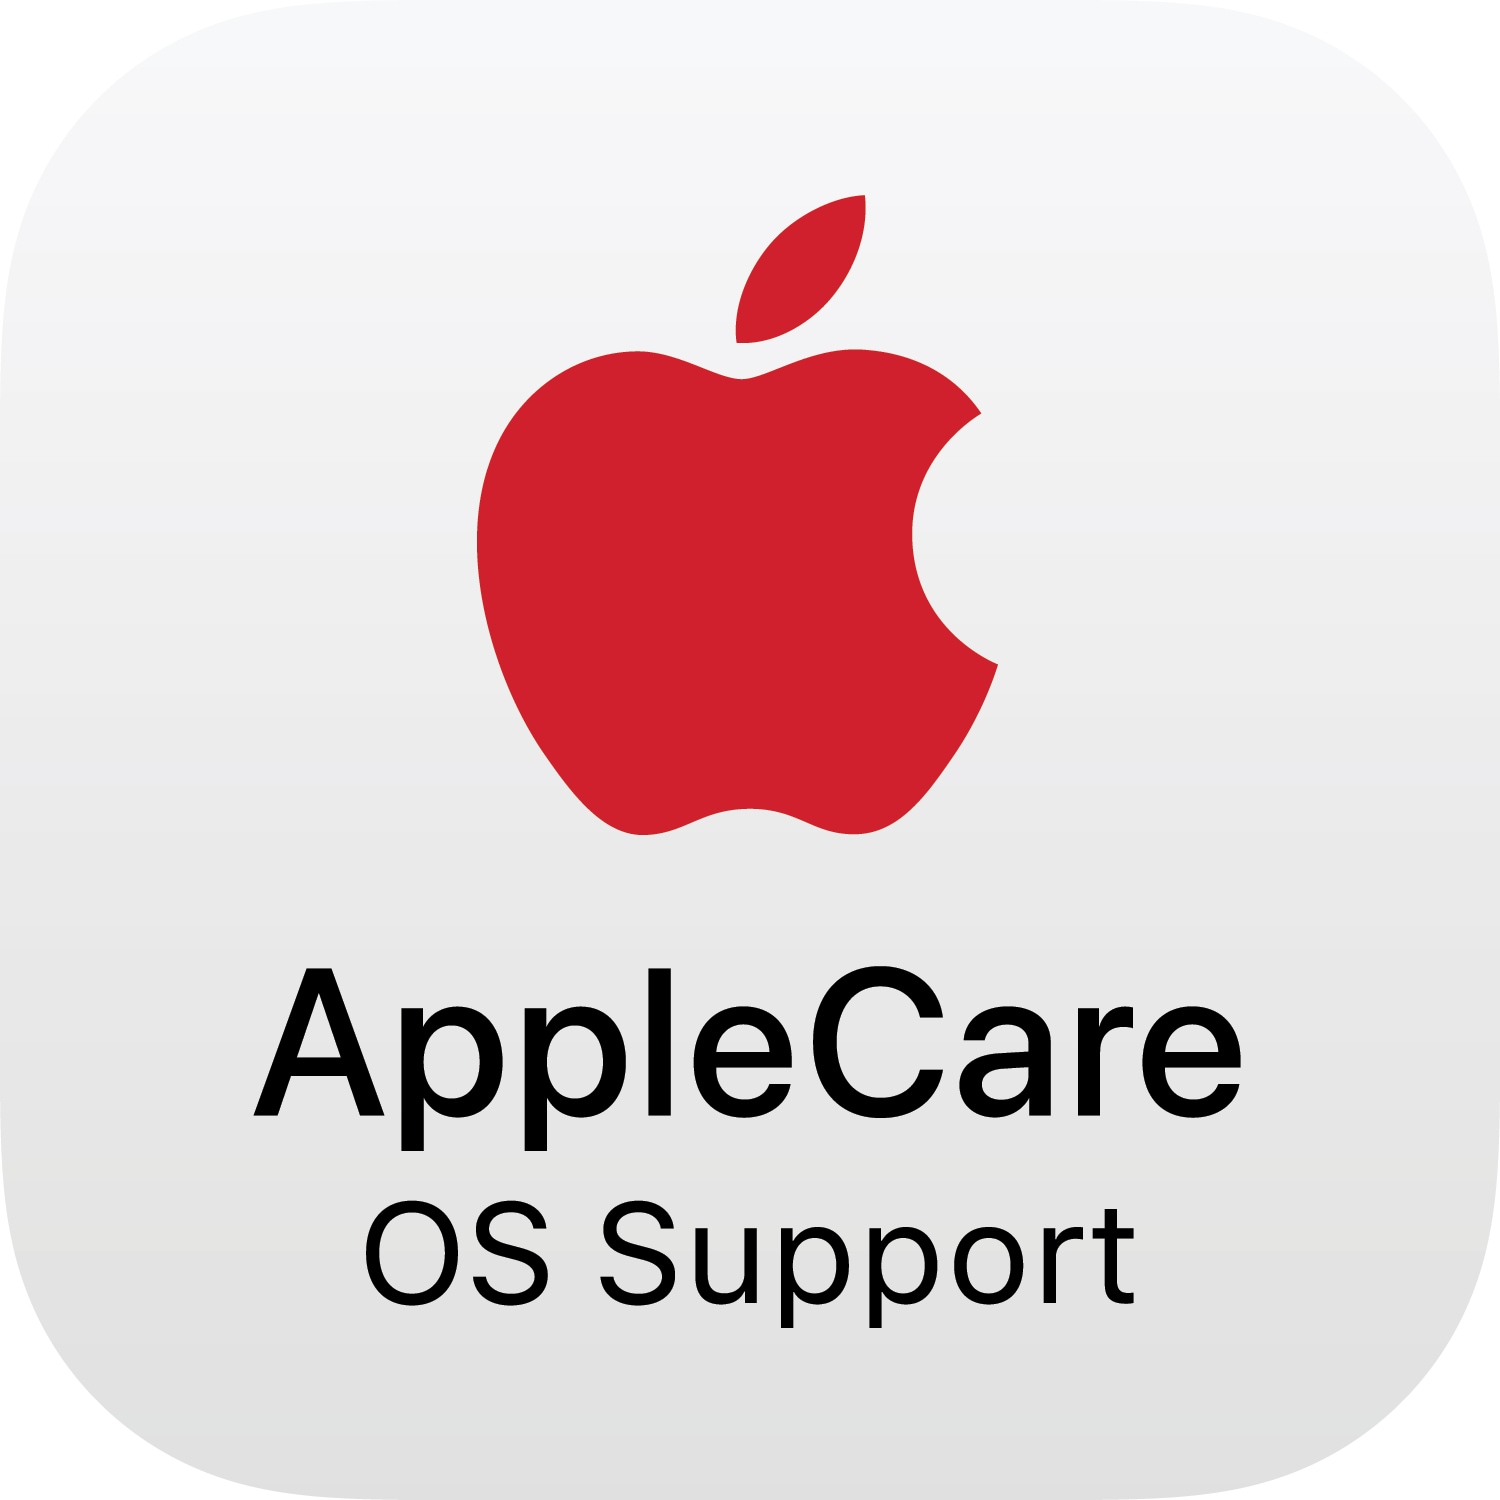 AppleCare OS Support - Preferred - technical support - for Apple Mac OS X S